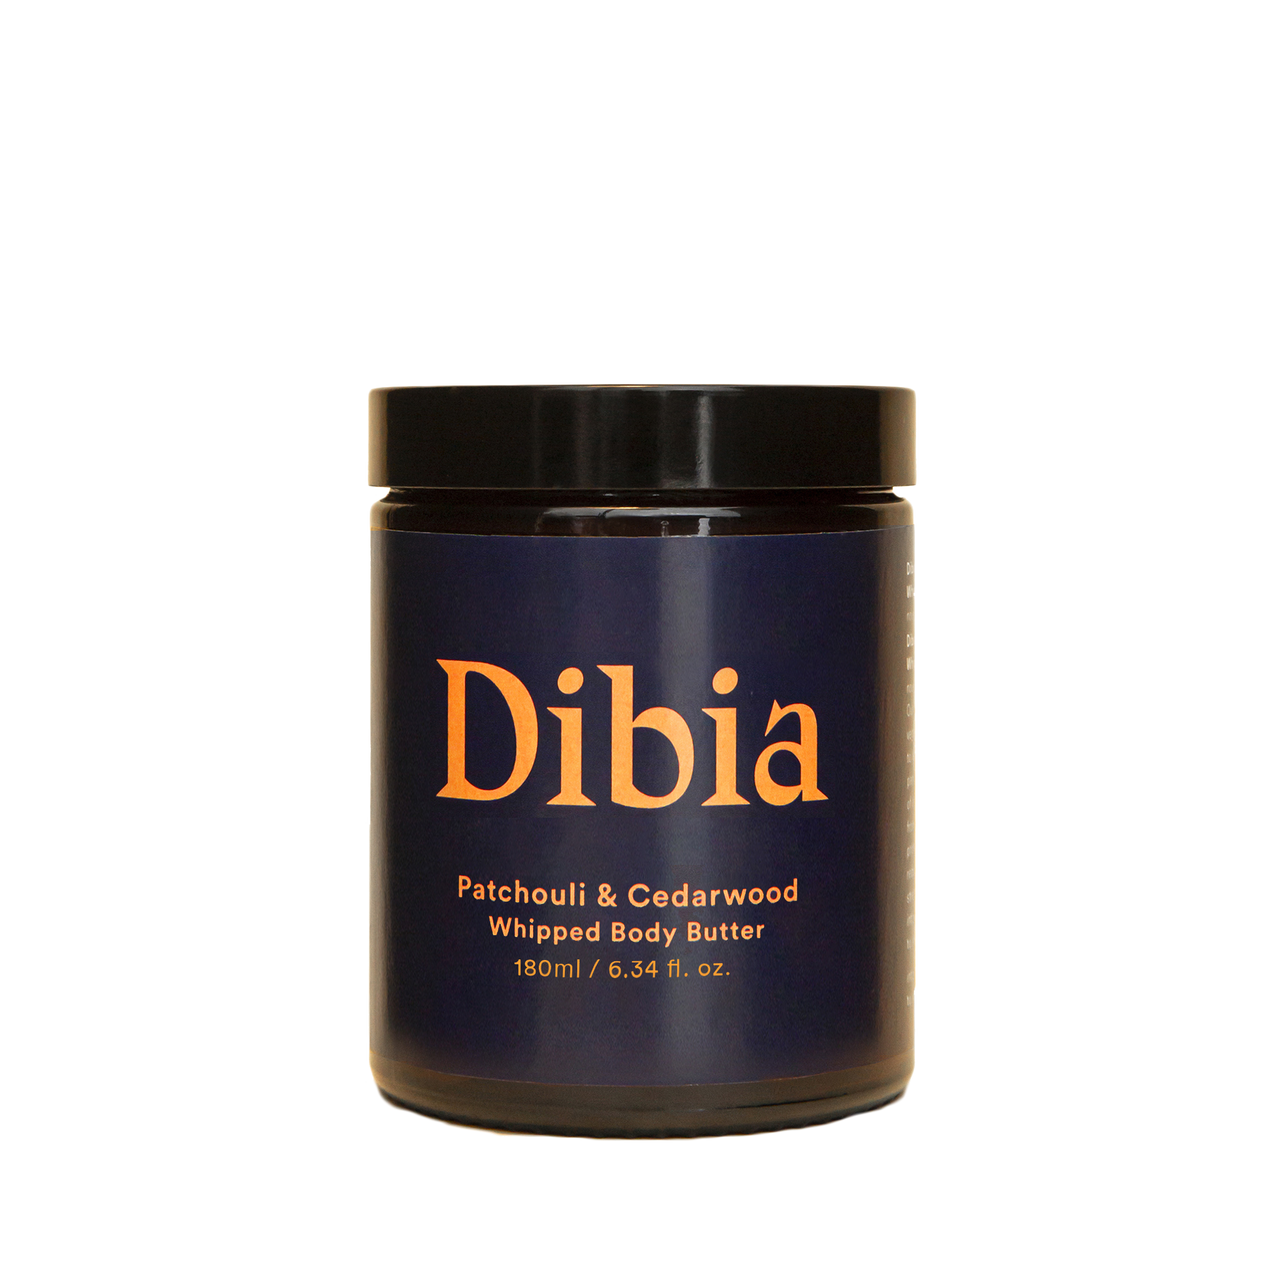 DIBIA - PATCHOULI AND CEDARWOOD WHIPPED BODY BUTTER